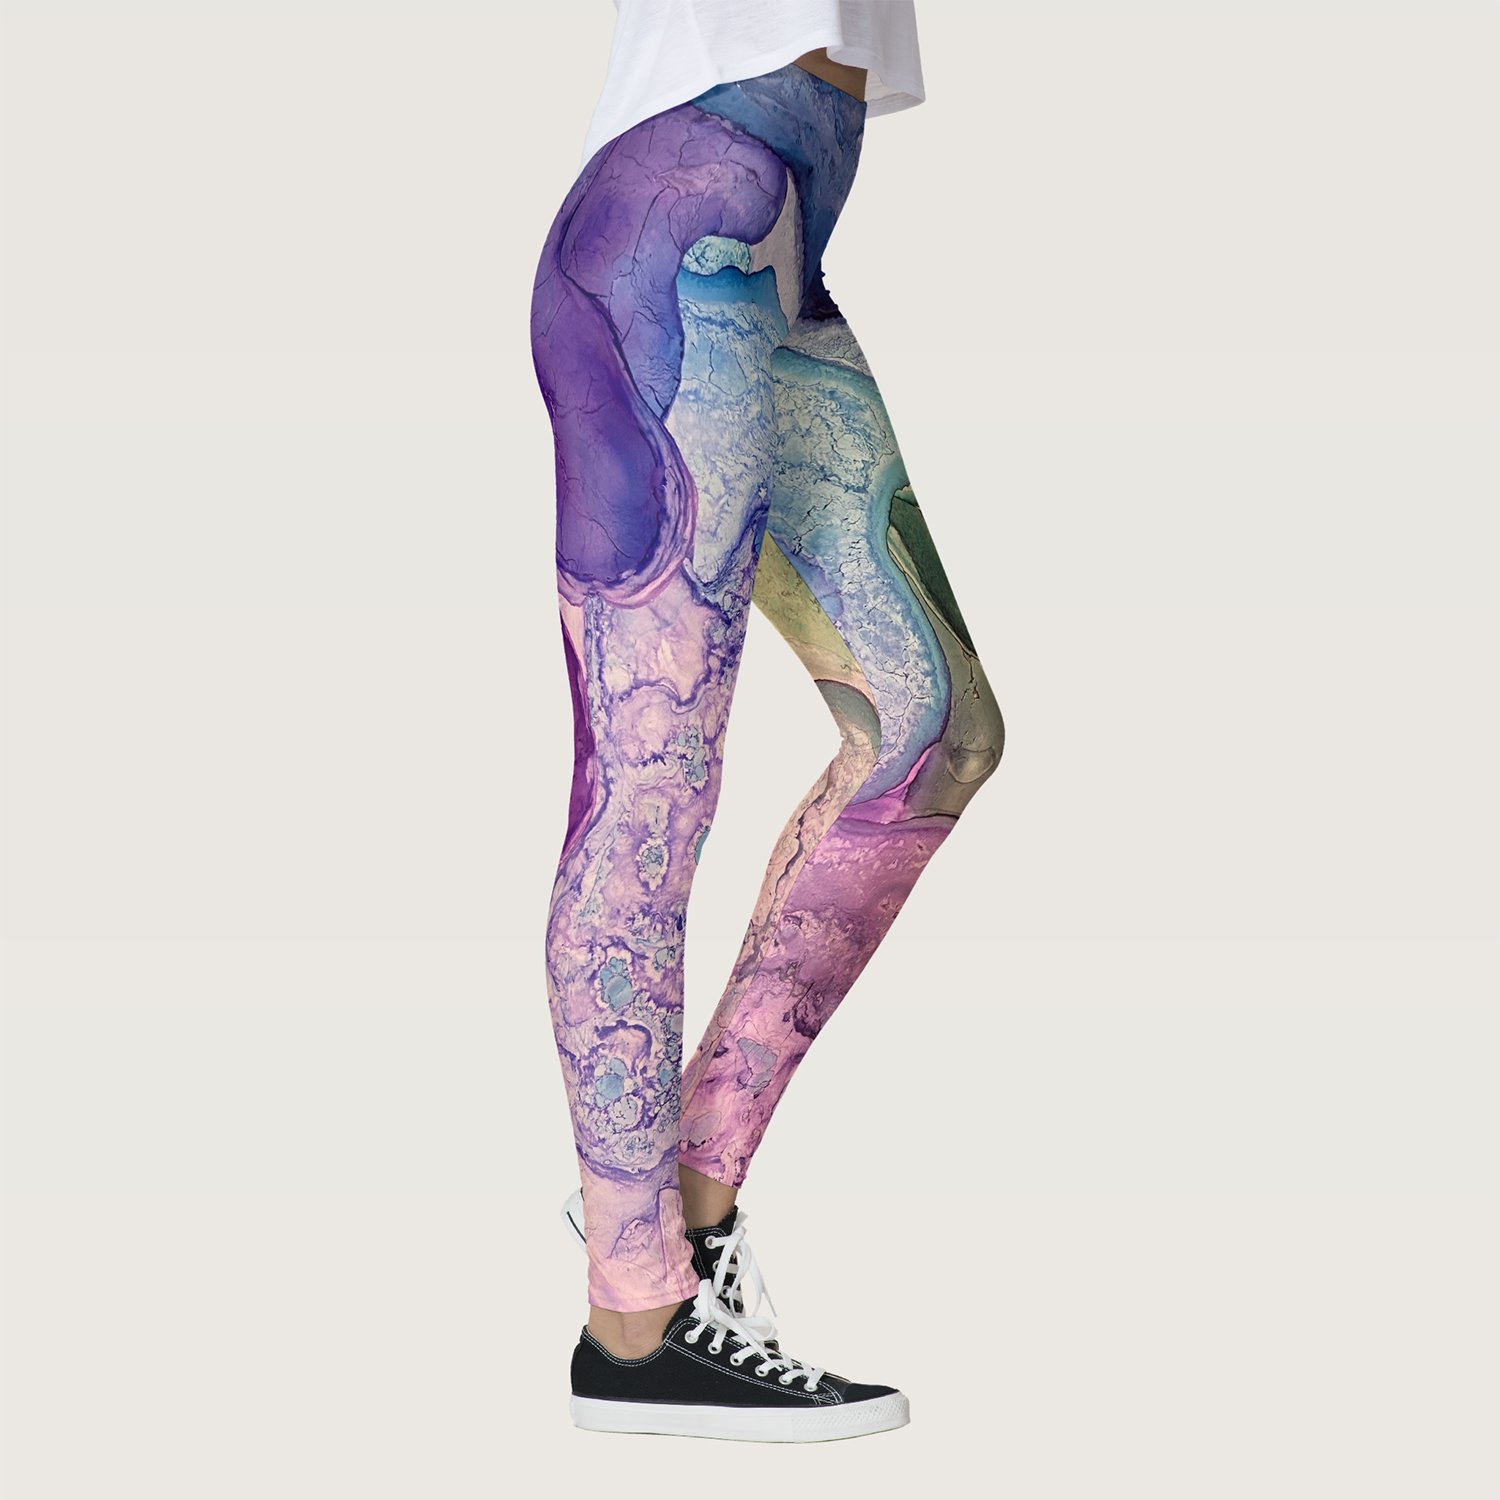 Funky Leggings with Alcohol Ink Abstract Art Design (Copy)